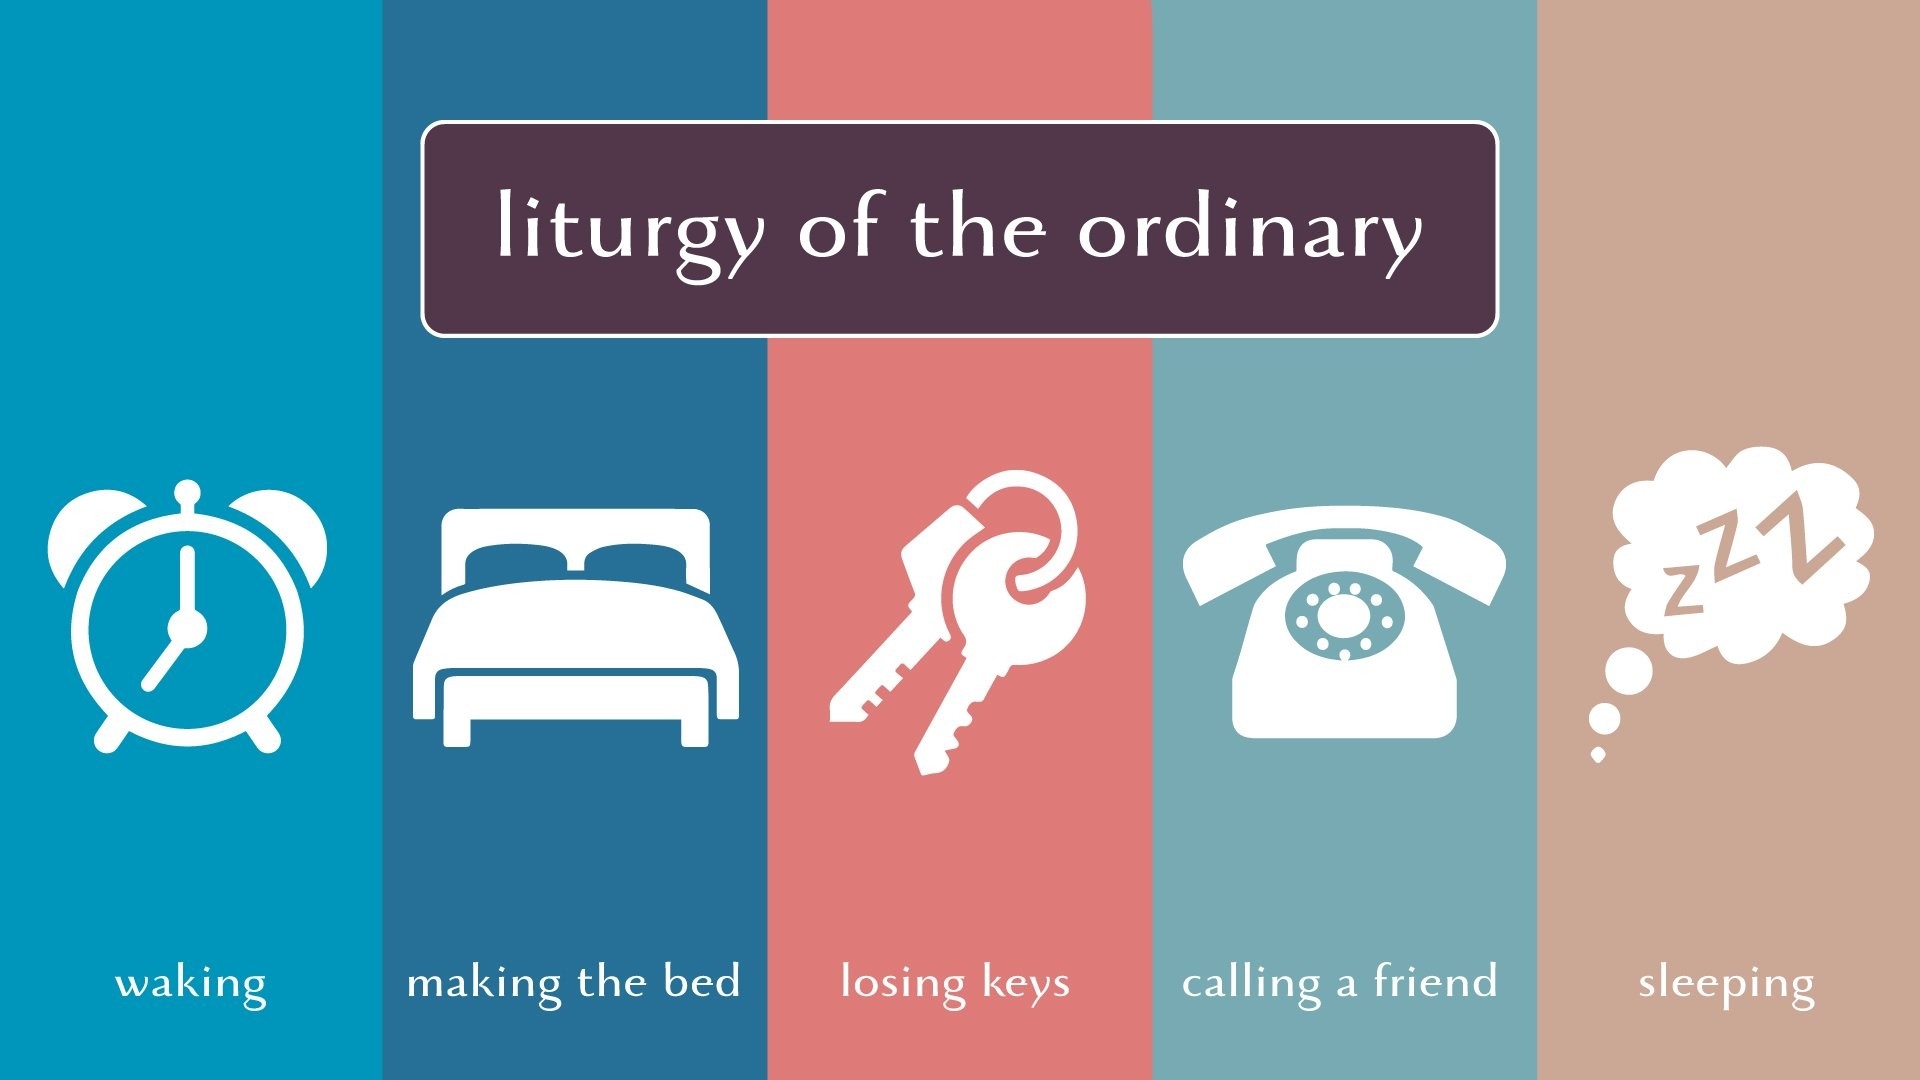 Liturgy Of The Ordinary - Middletown United Methodist Church  August 2, 2021 Is What Methodist Liturgical Sunday